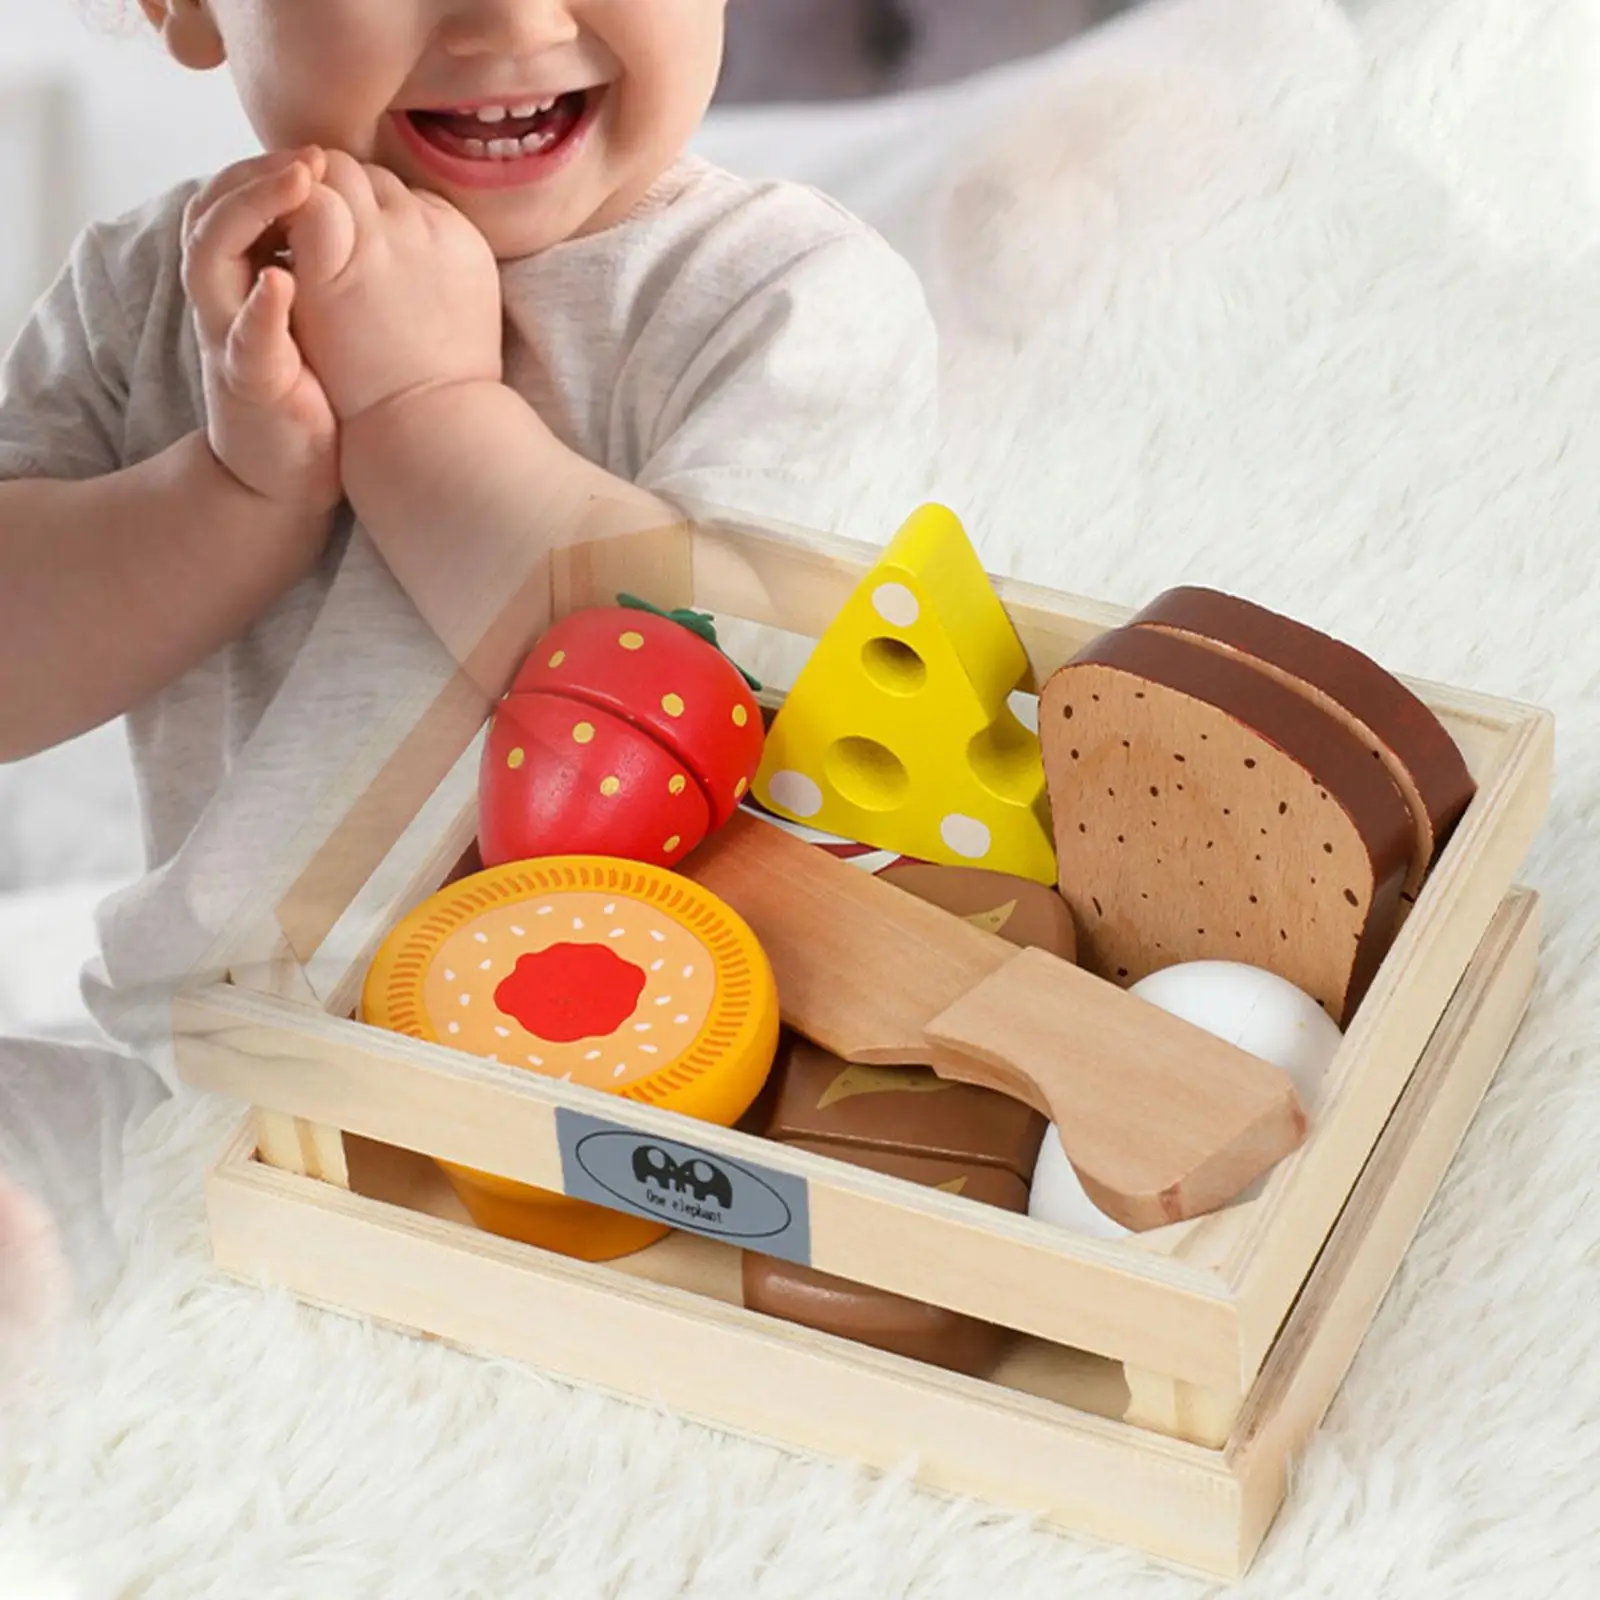 Toddler Cutting Play Food Toy, Simulation Kitchen Pretend Toy, Fake Food Wooden Classic Game Educational Toy